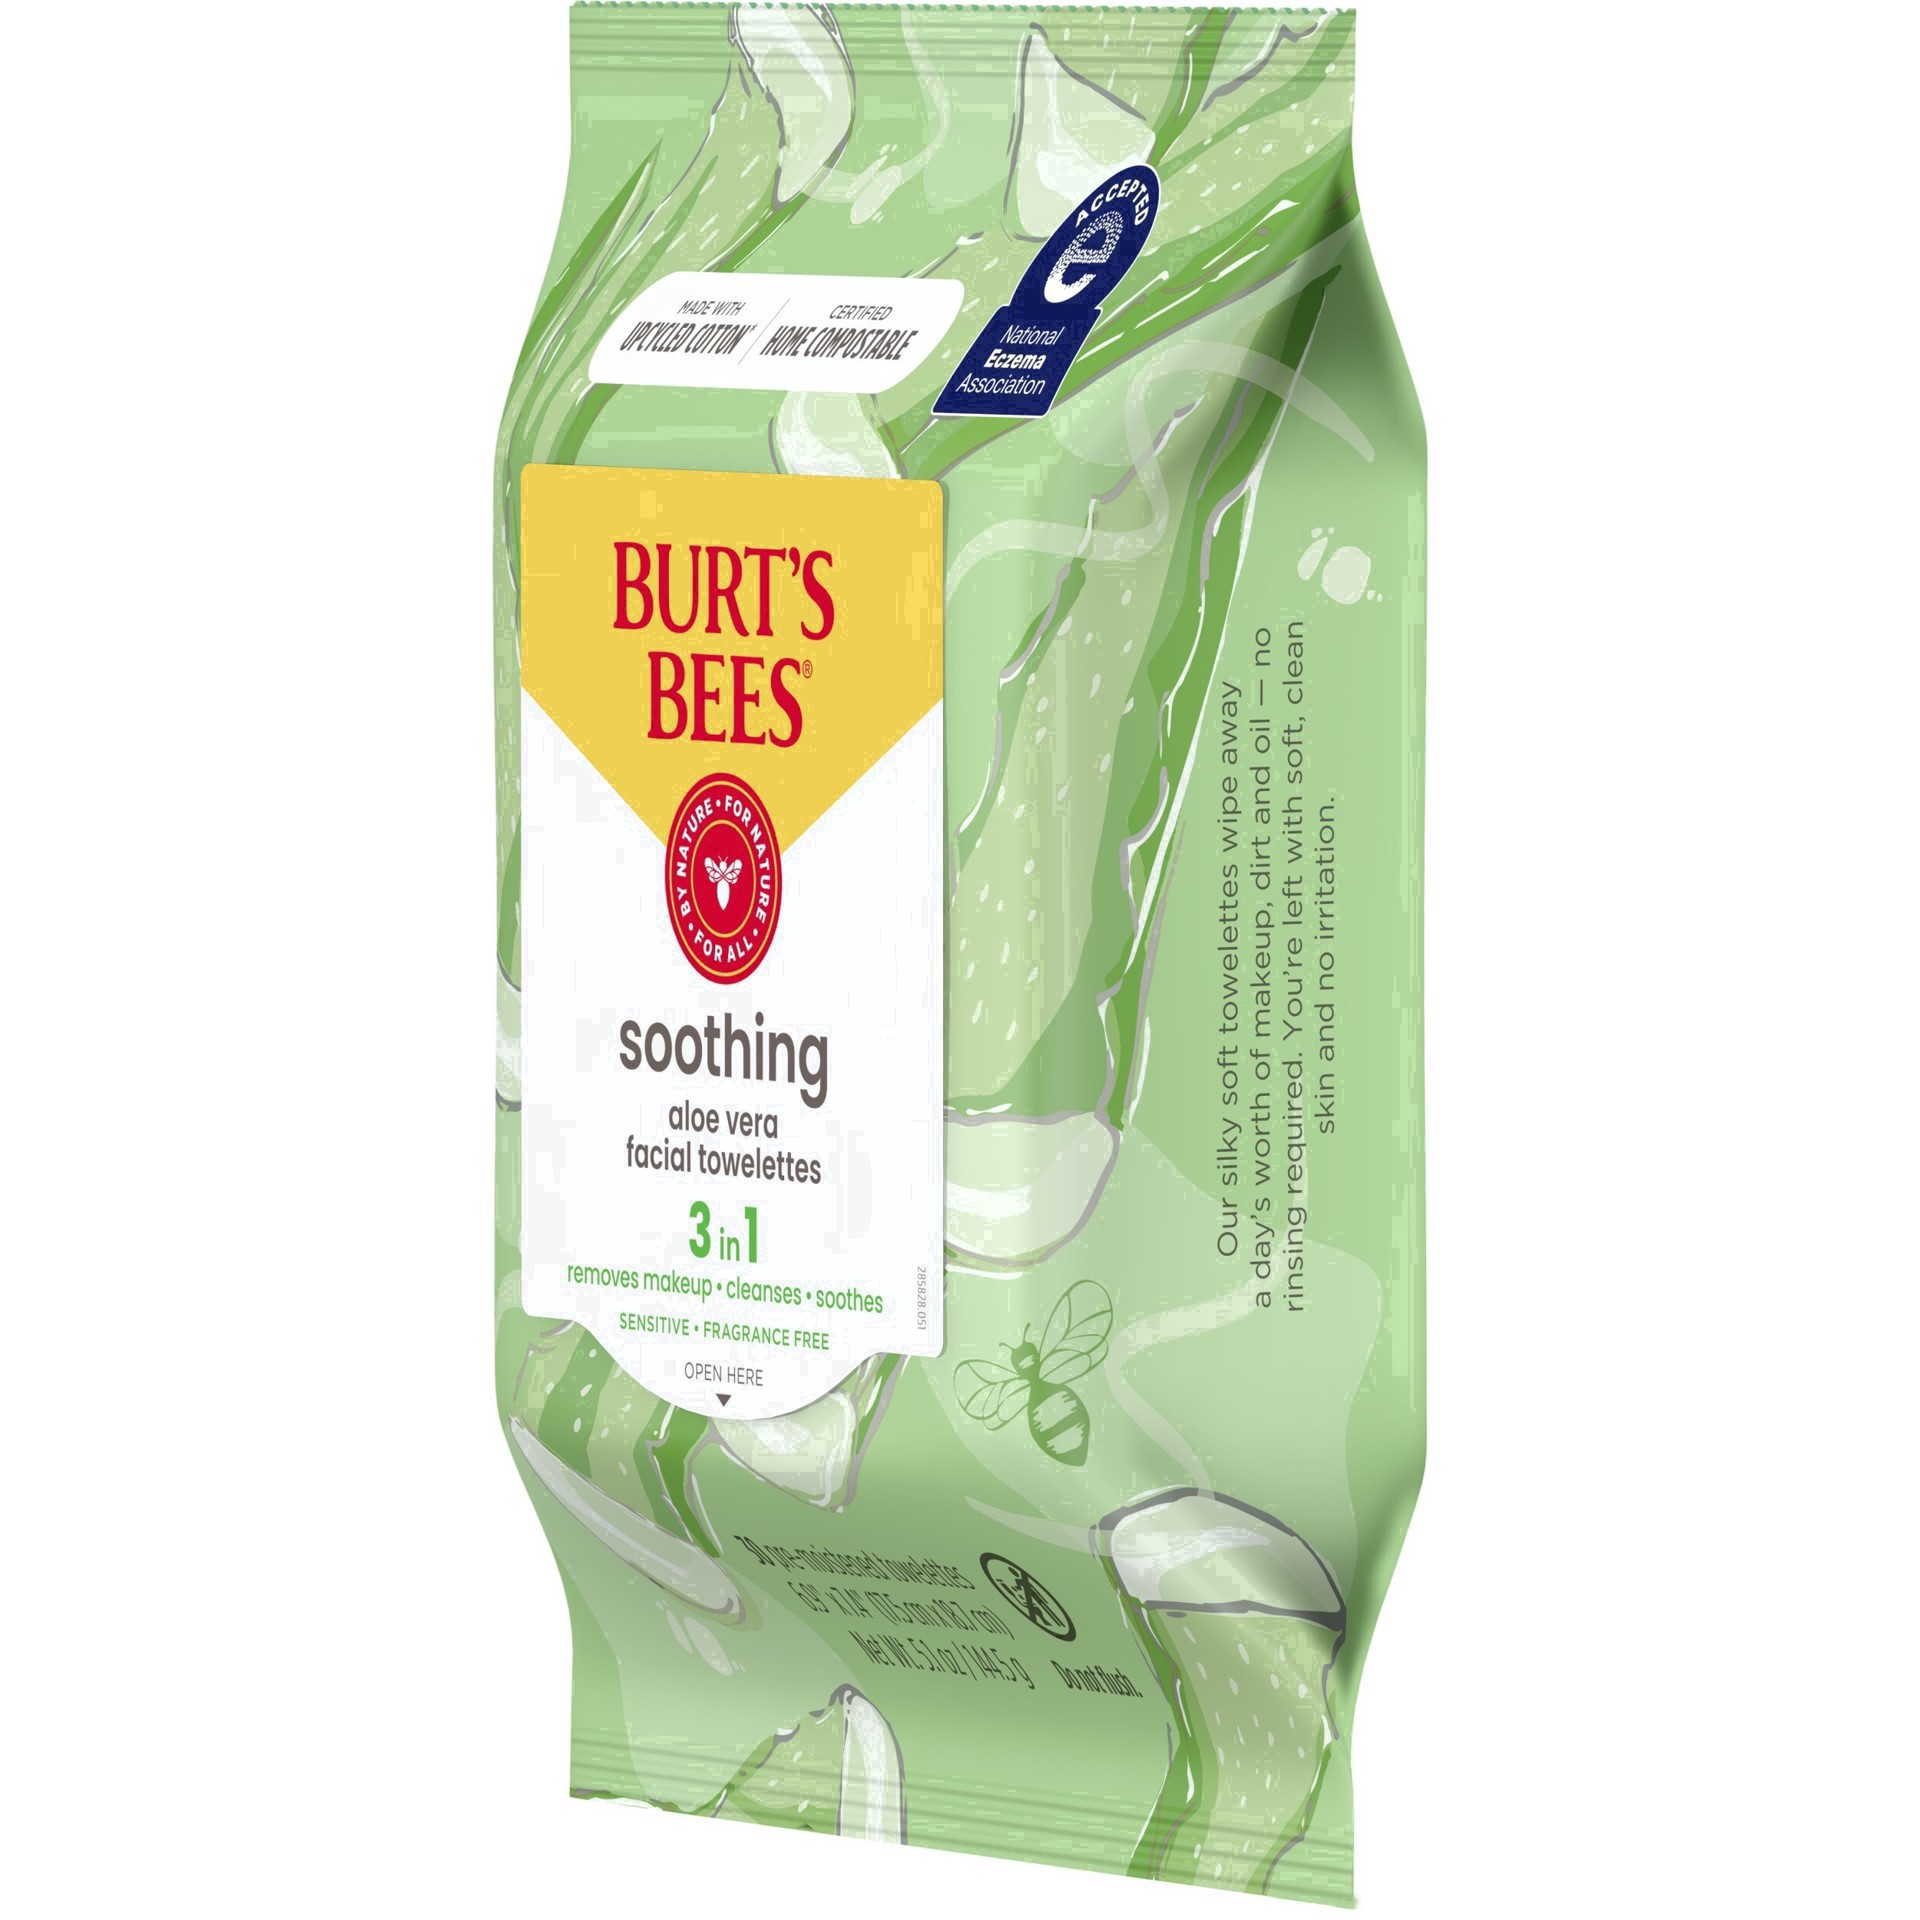 slide 30 of 137, Burt's Bees Soothing Facial Cleanser and Makeup Remover Towelettes with Aloe Vera for Sensitive Skin, Made with Upcycled Cotton, 30 Count, 30 ct